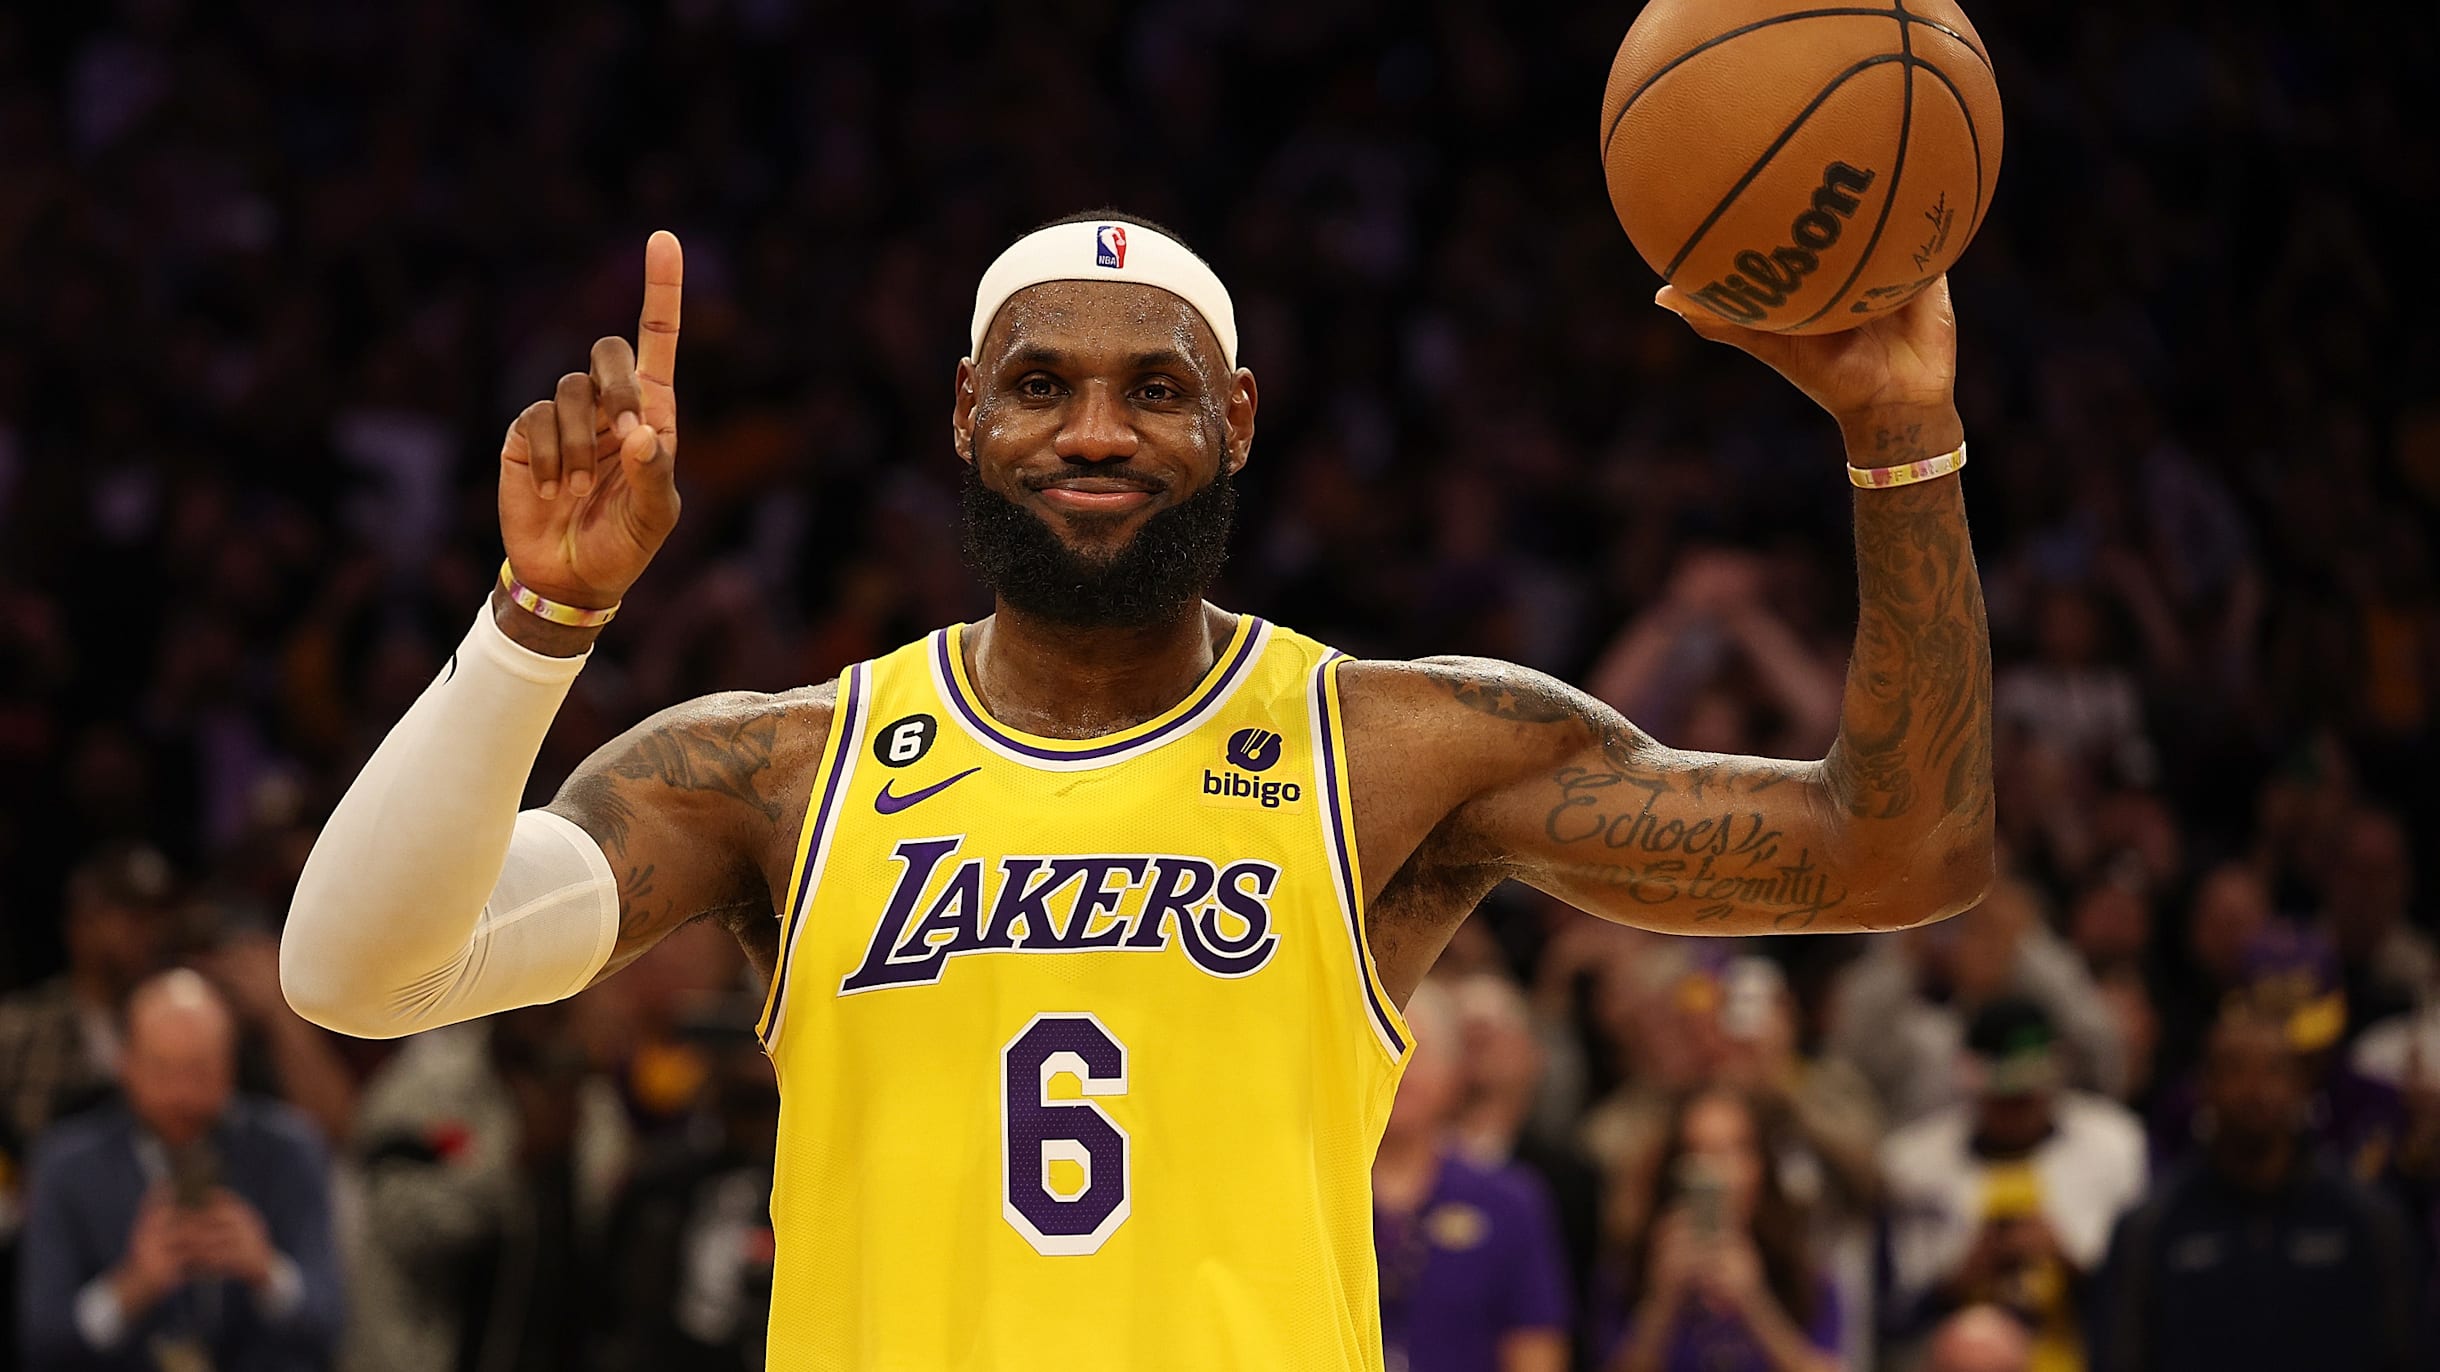 LeBron James: Career stats, records, awards and medals of US basketball superstar - complete list